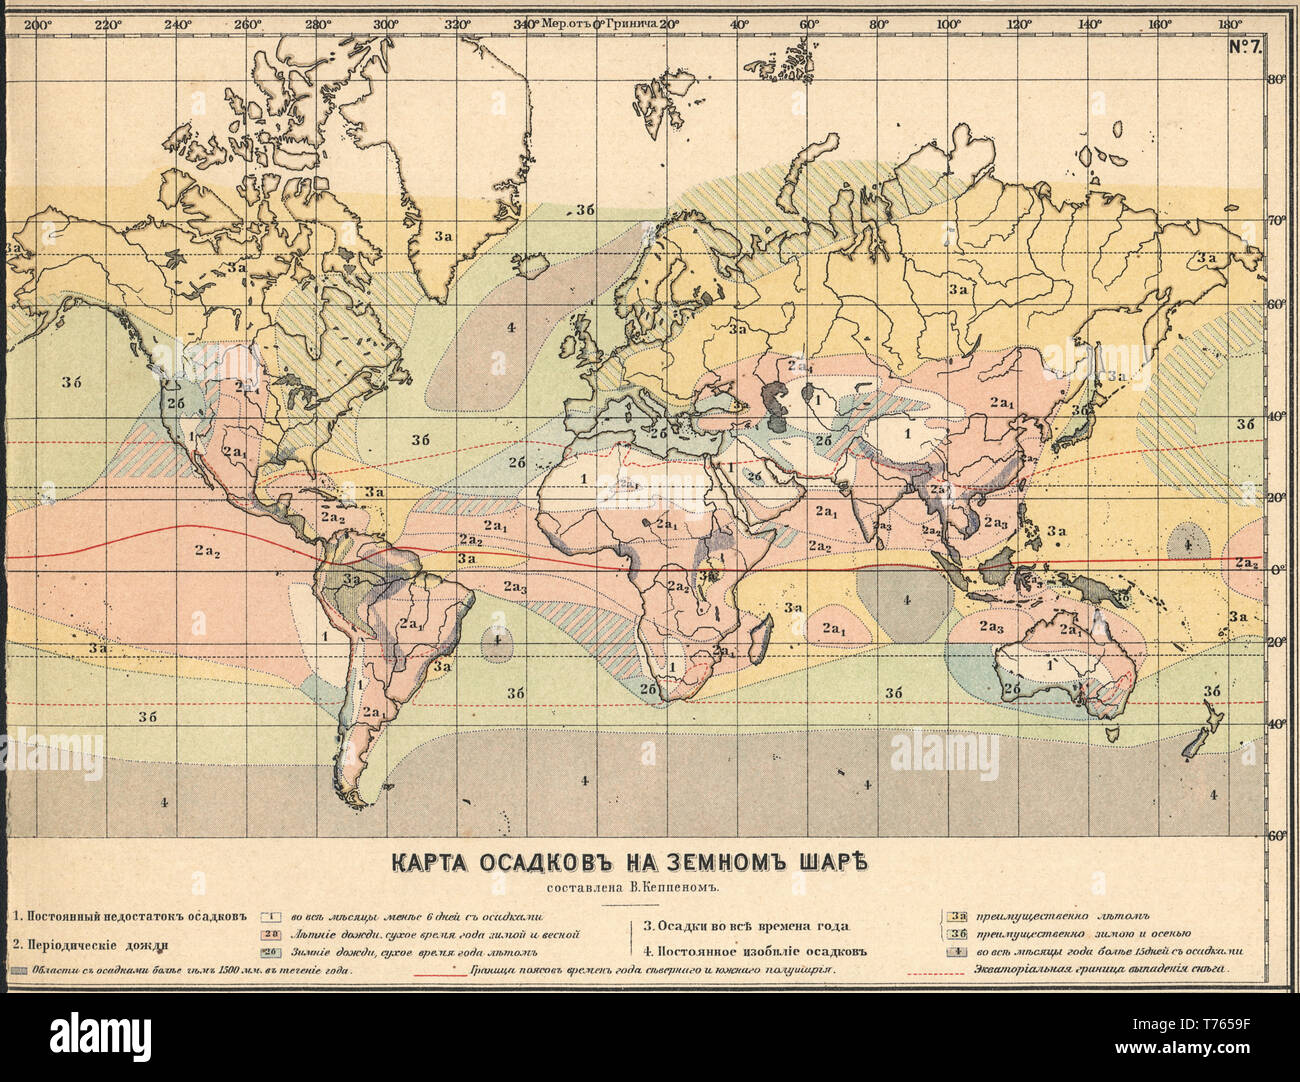 Earth Climatology Maps Map of precipitation on the Globe Köppen climate classification New table atlas A.F. Marcks St. Petersburg, 1910 Stock Photo